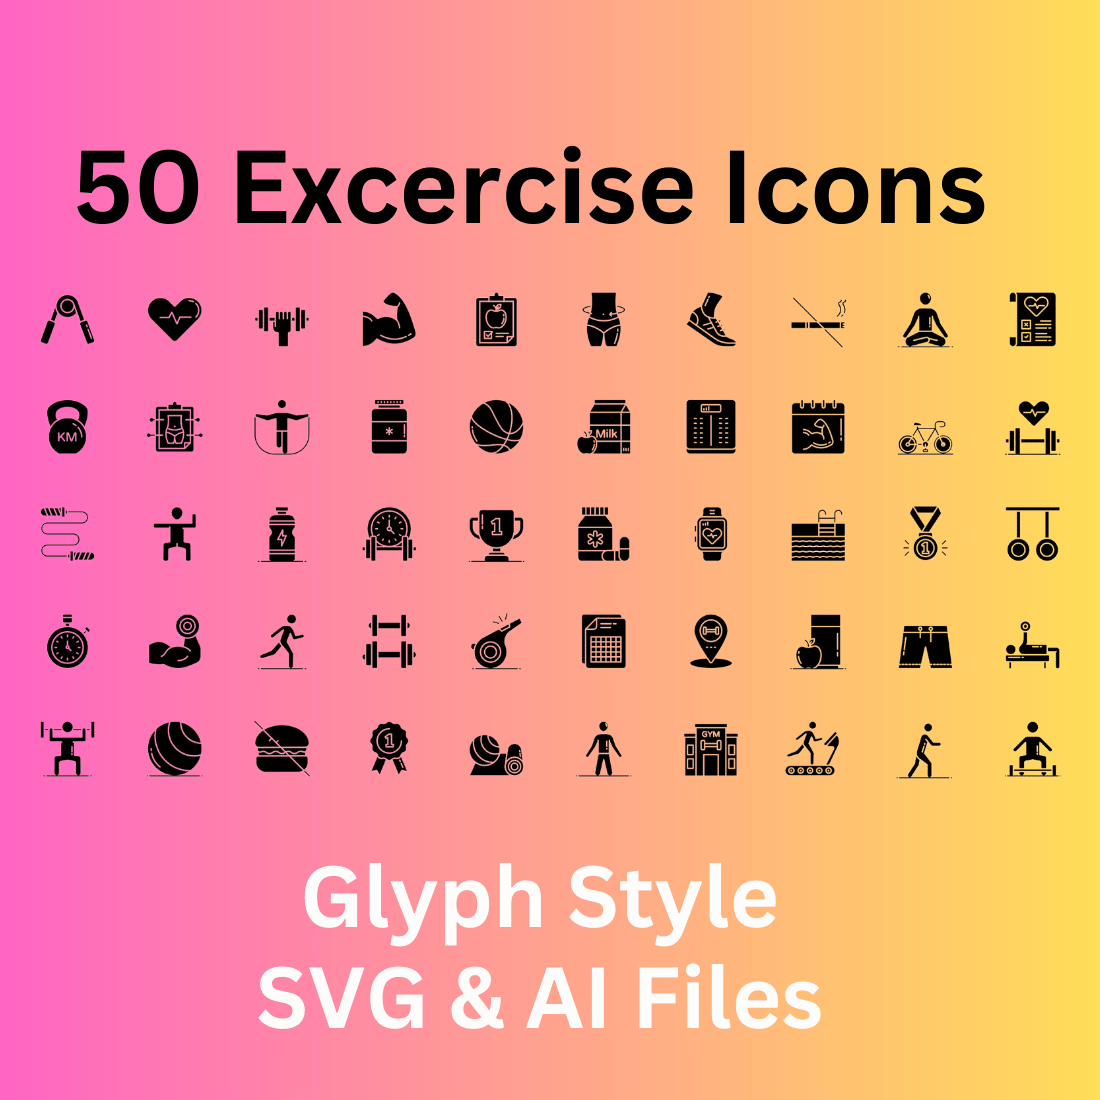 Exercise Icon Set 50 Glyph Icons - SVG And AI Files cover image.